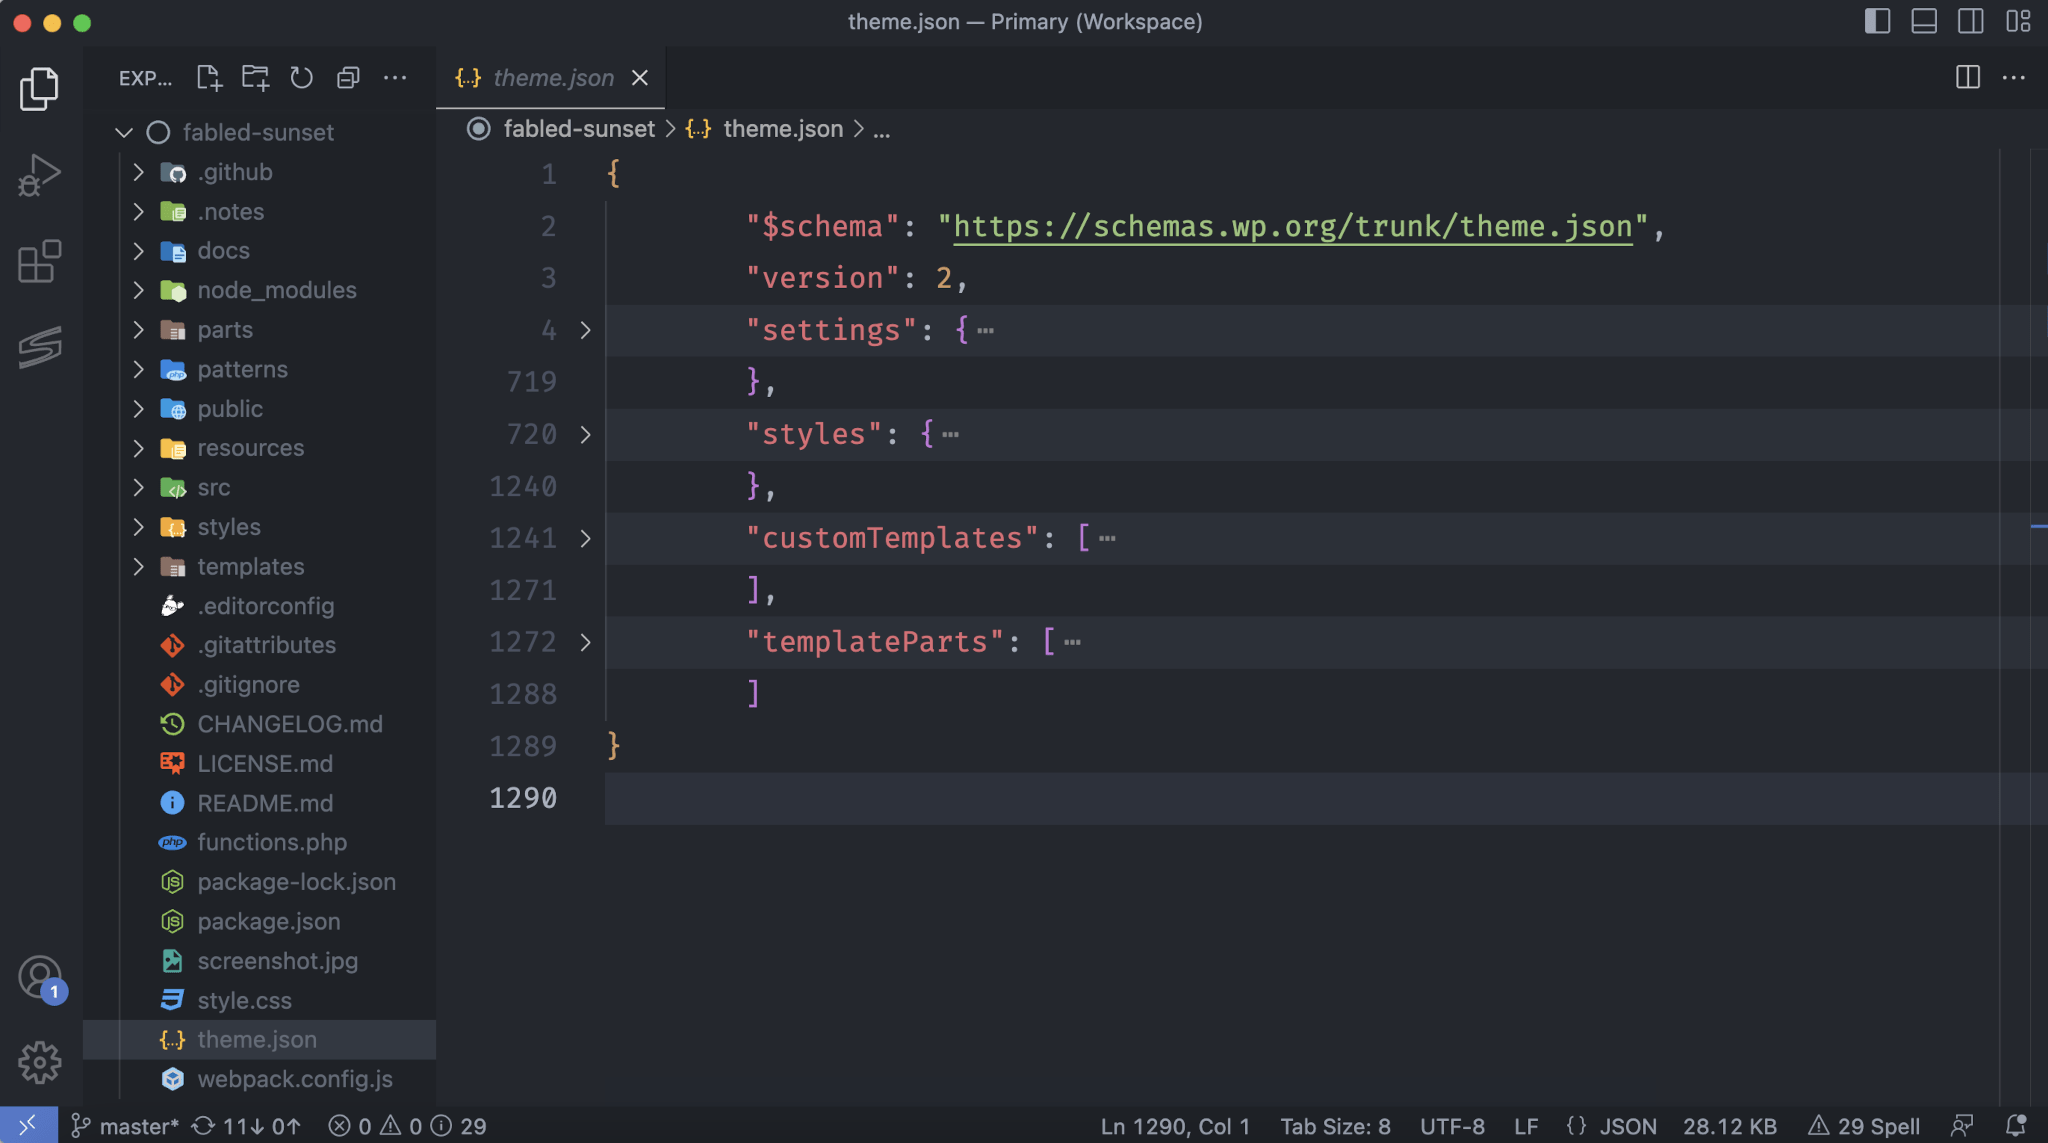 Visual Studio Code editor showing the structure of a theme's files and folders. In the code area, a theme.json file is shown.